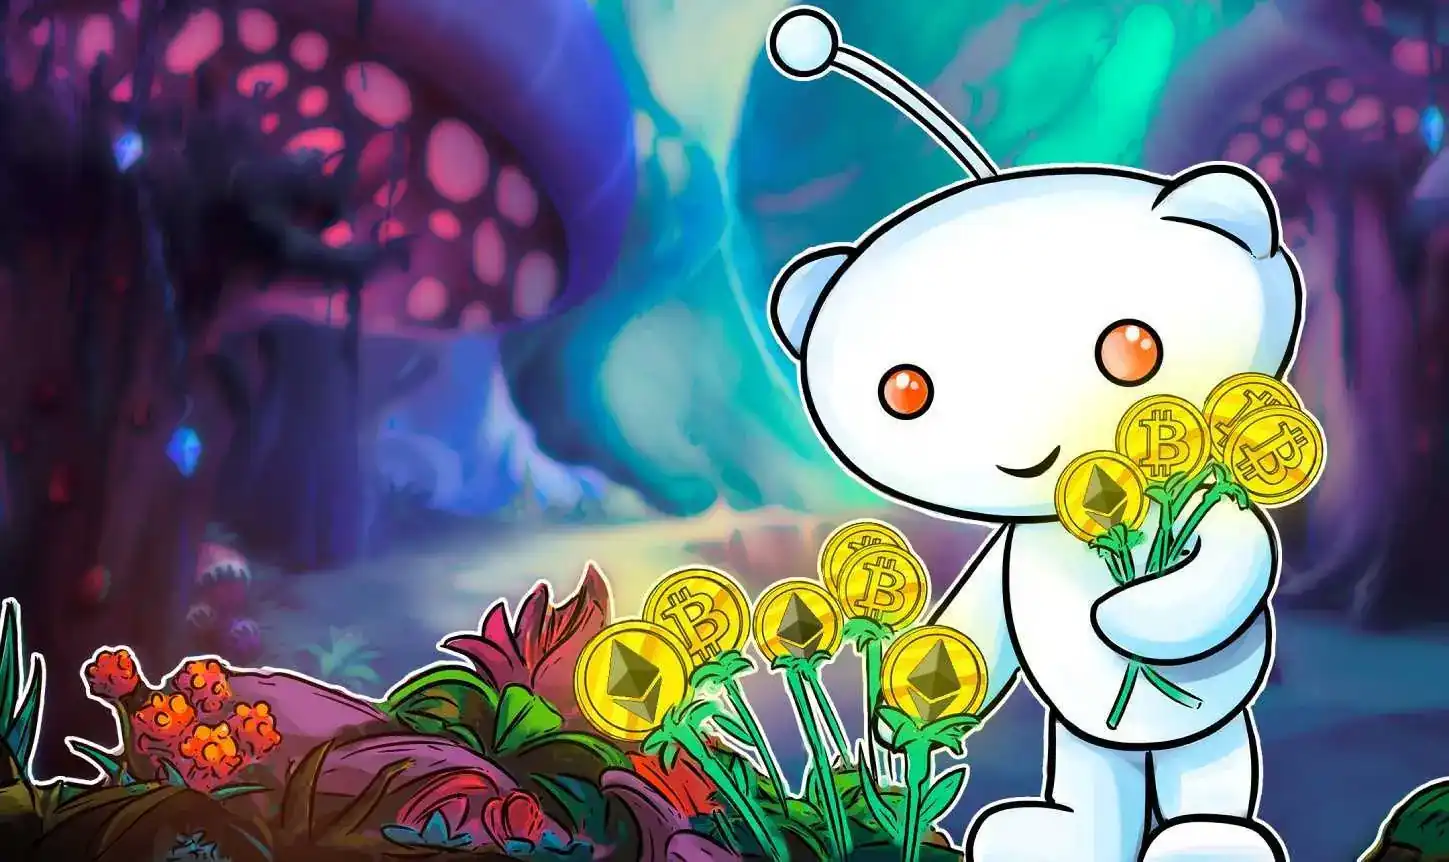 Reddit Invests in Bitcoin and Ethereum, Sees Significant Potential in Crypto